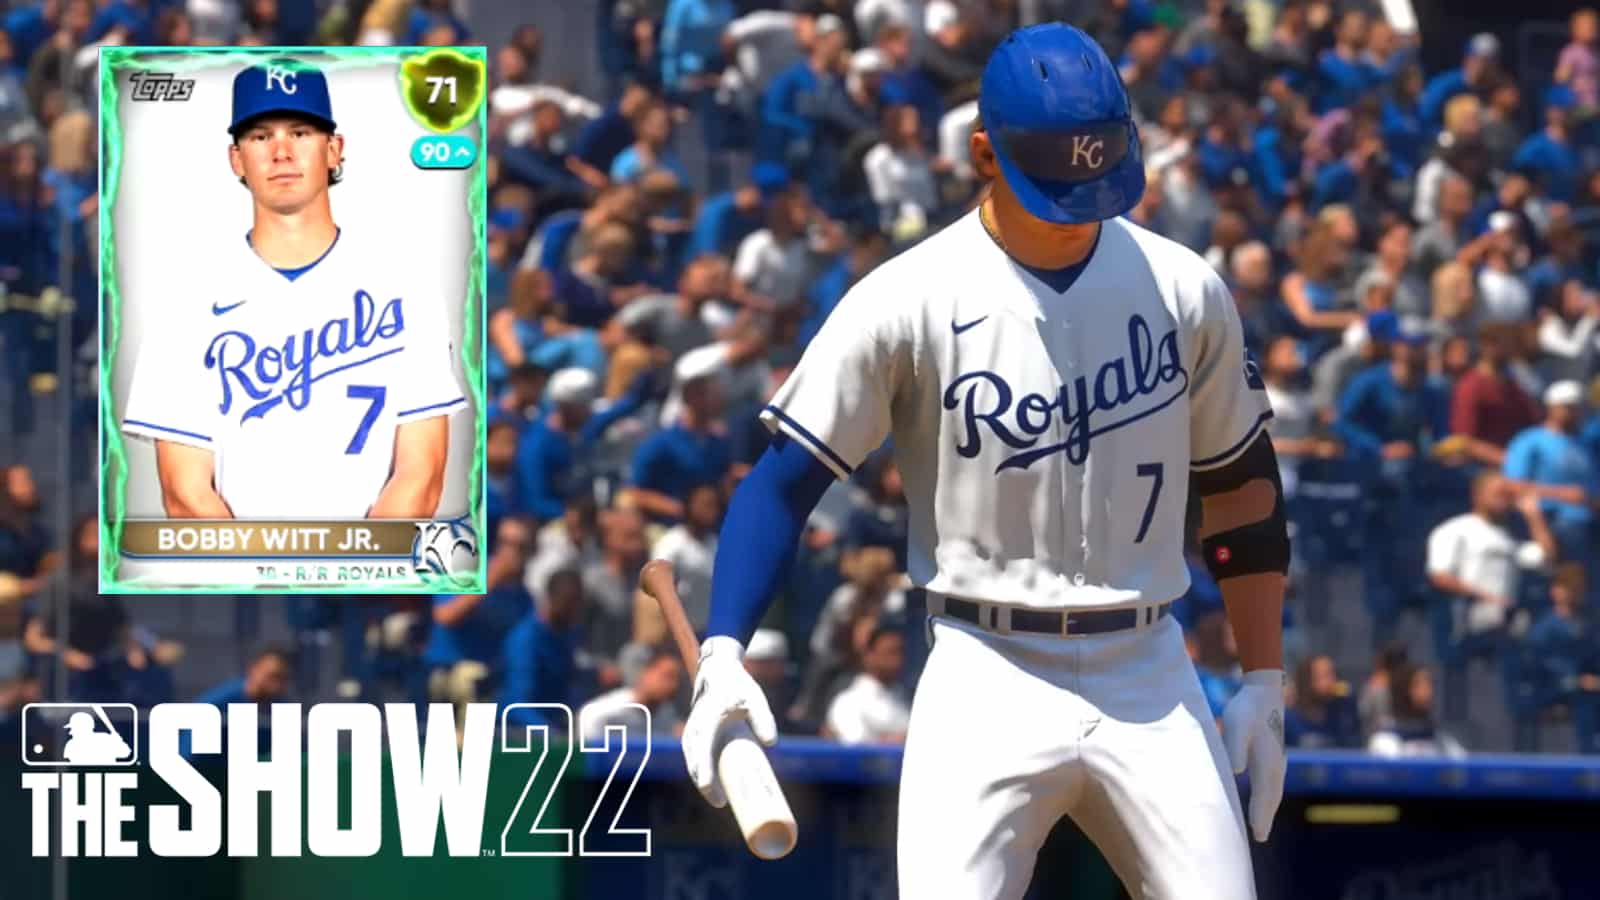 mlb the show 22 white jersey